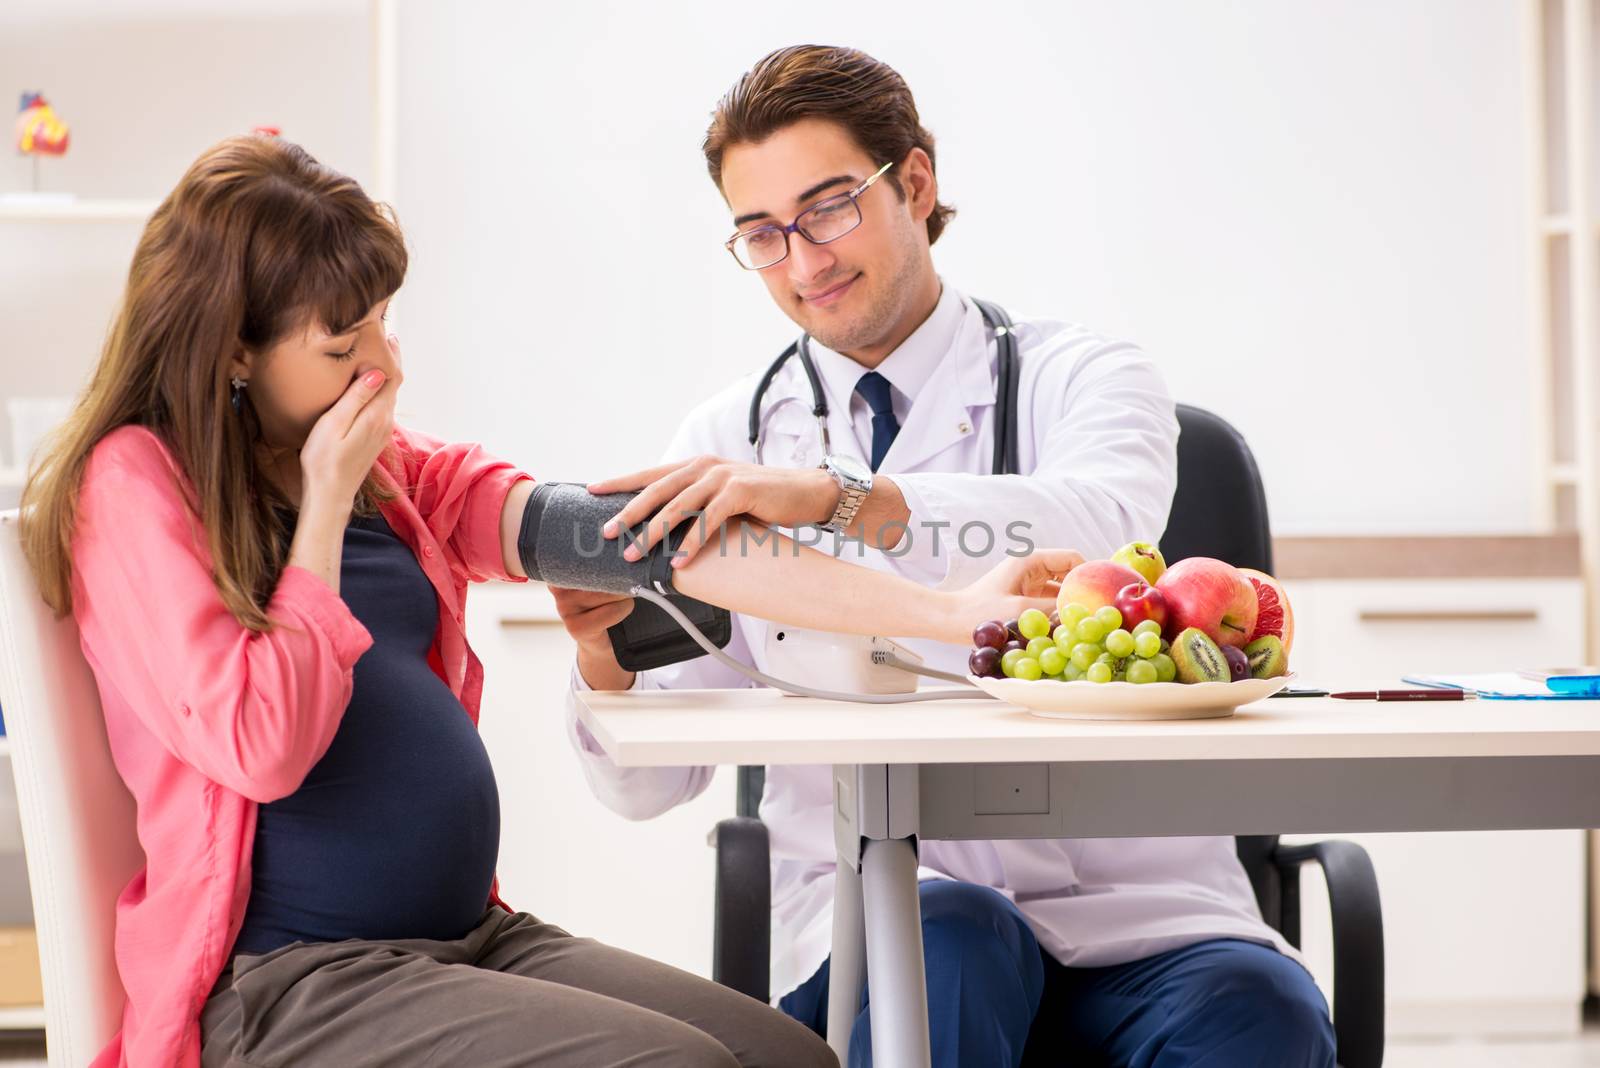 Pregnant woman visiting doctor discussing healthy diet by Elnur